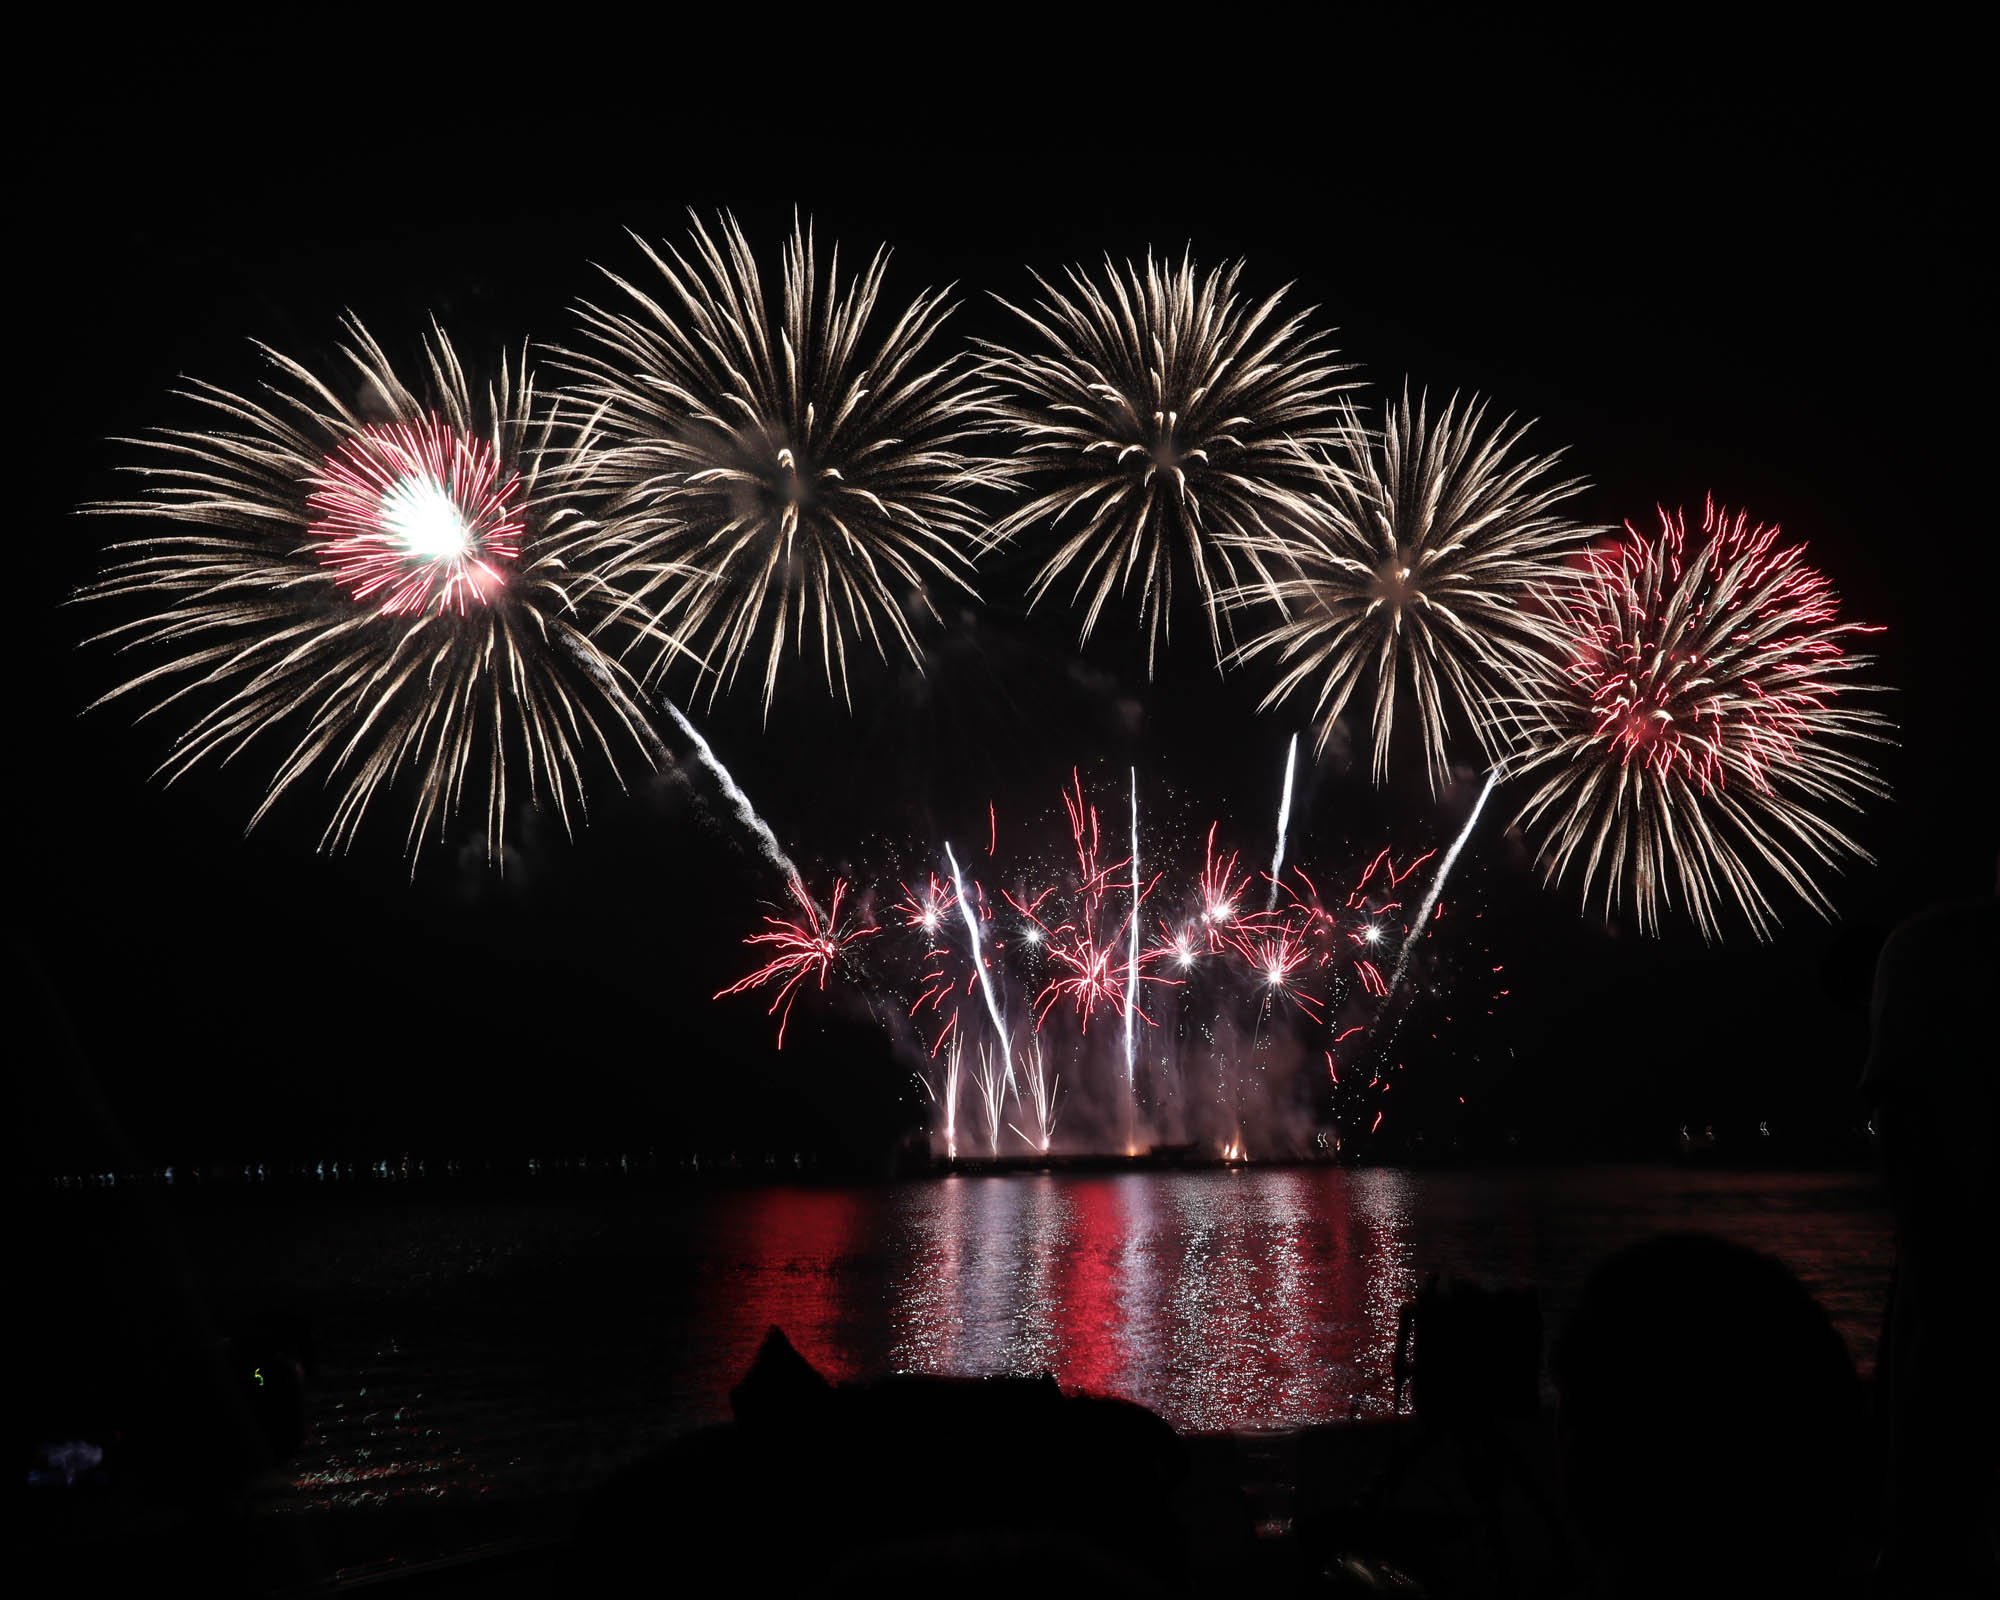 Fireworks from Canada lights up Manila Bay